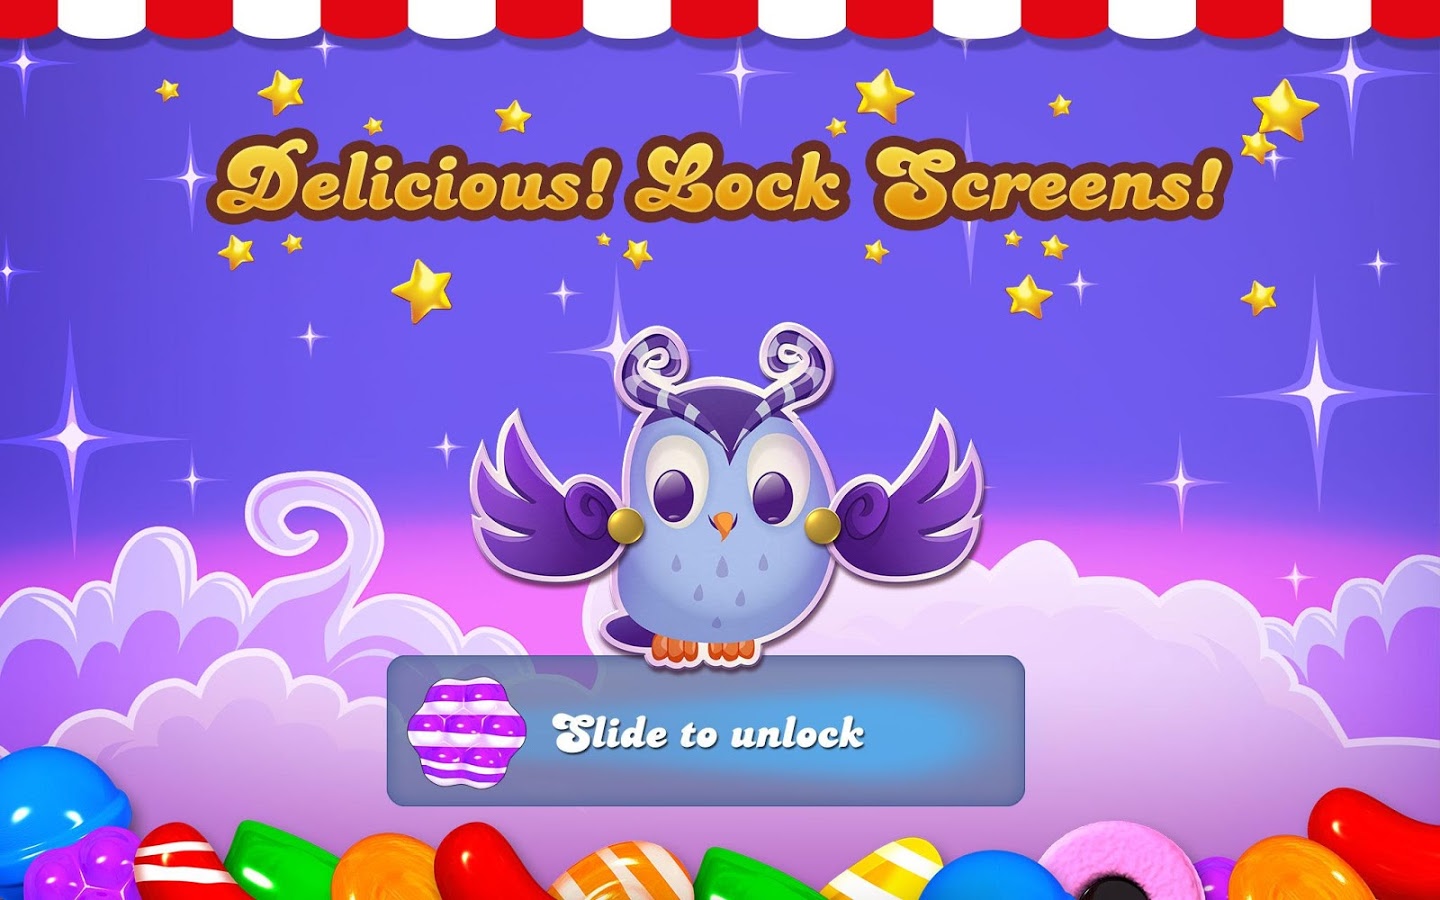 Candy Crush Android Theme